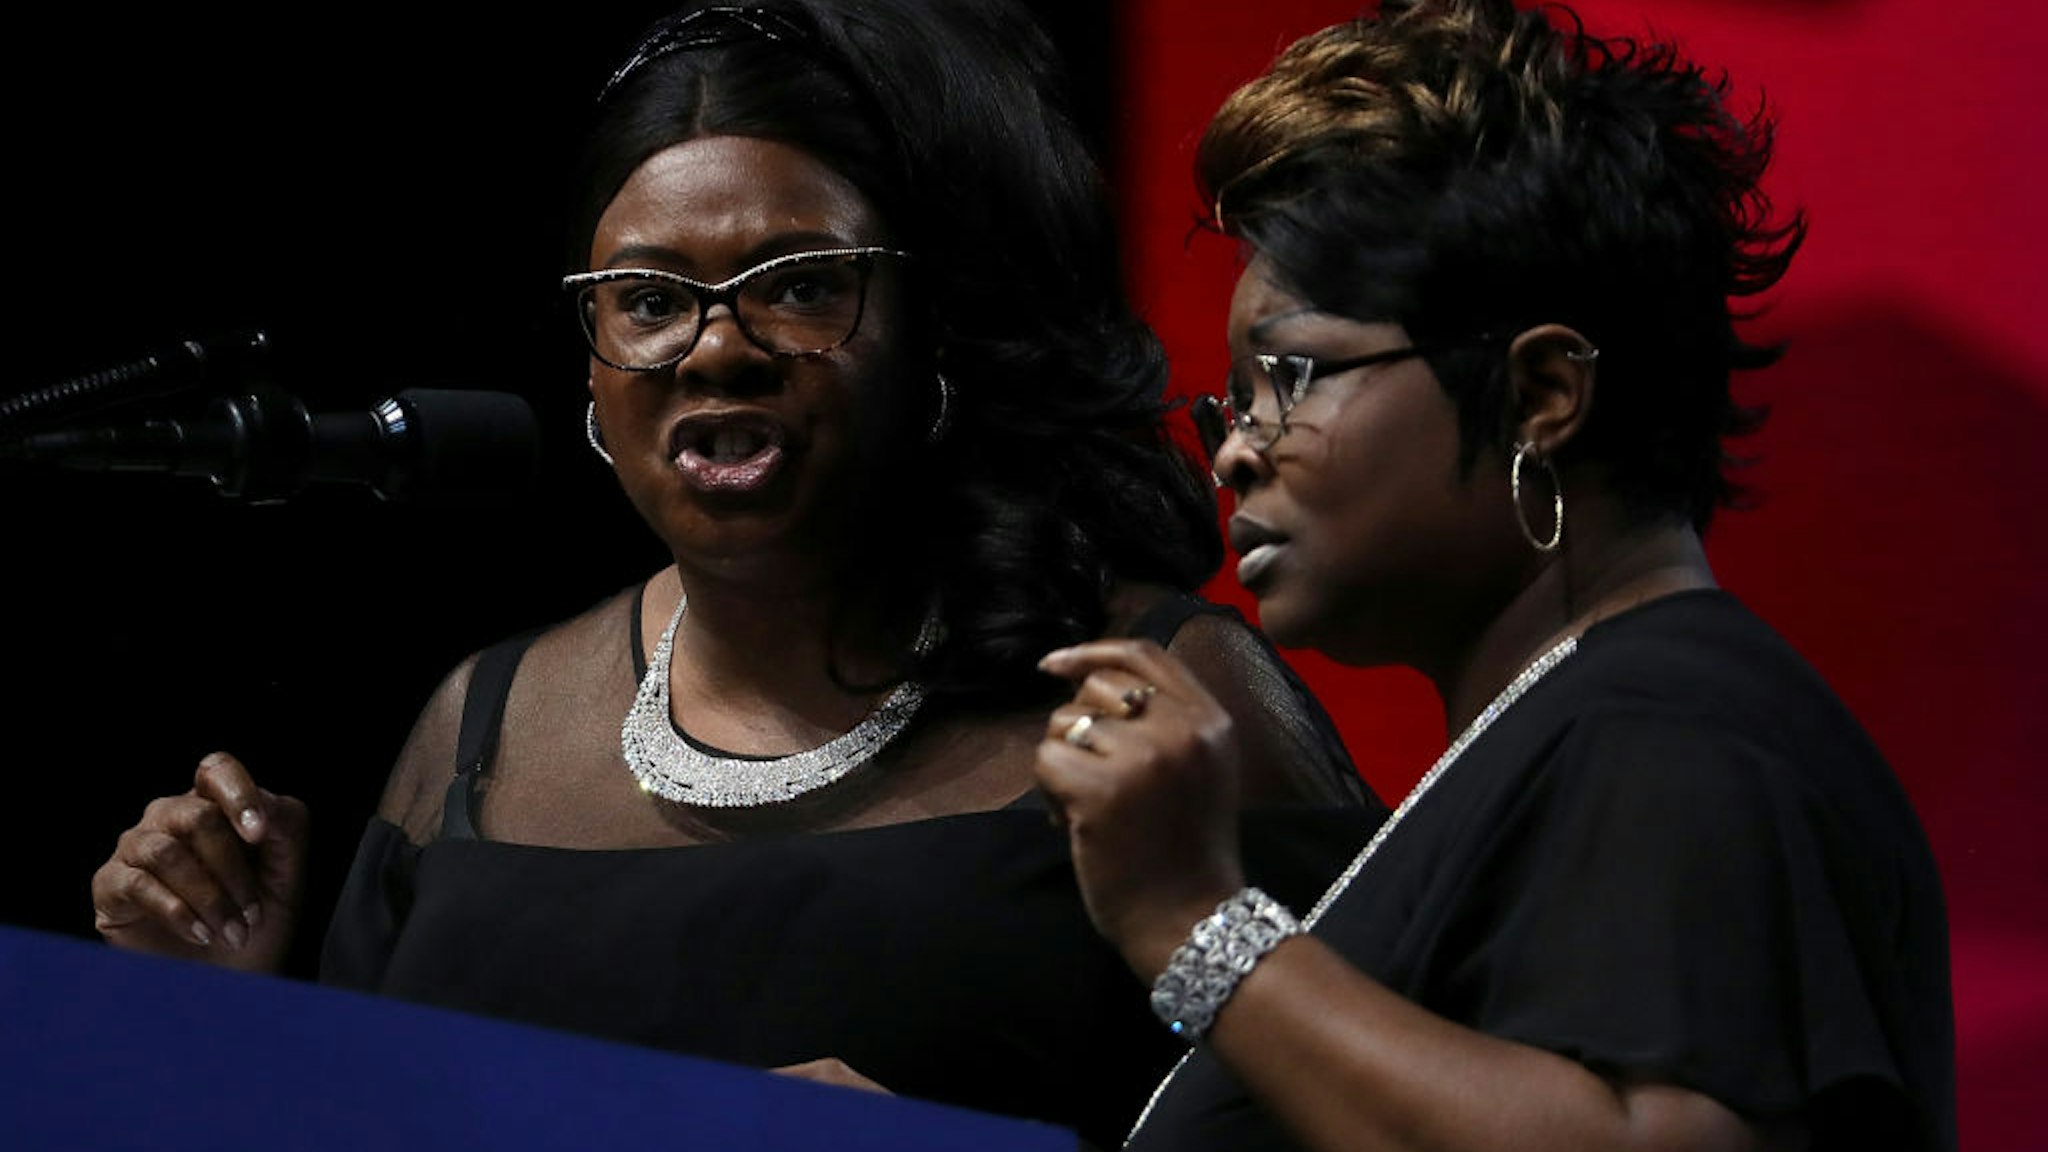 DALLAS, TX - MAY 04: Lynette Hardaway and Rochelle Richardson, also known as Diamond and Silk, speak at the NRA-ILA Leadership Forum during the NRA Annual Meeting &amp; Exhibits at the Kay Bailey Hutchison Convention Center on May 4, 2018 in Dallas, Texas. The National Rifle Association's annual meeting and exhibit runs through Sunday. (Photo by Justin Sullivan/Getty Images)